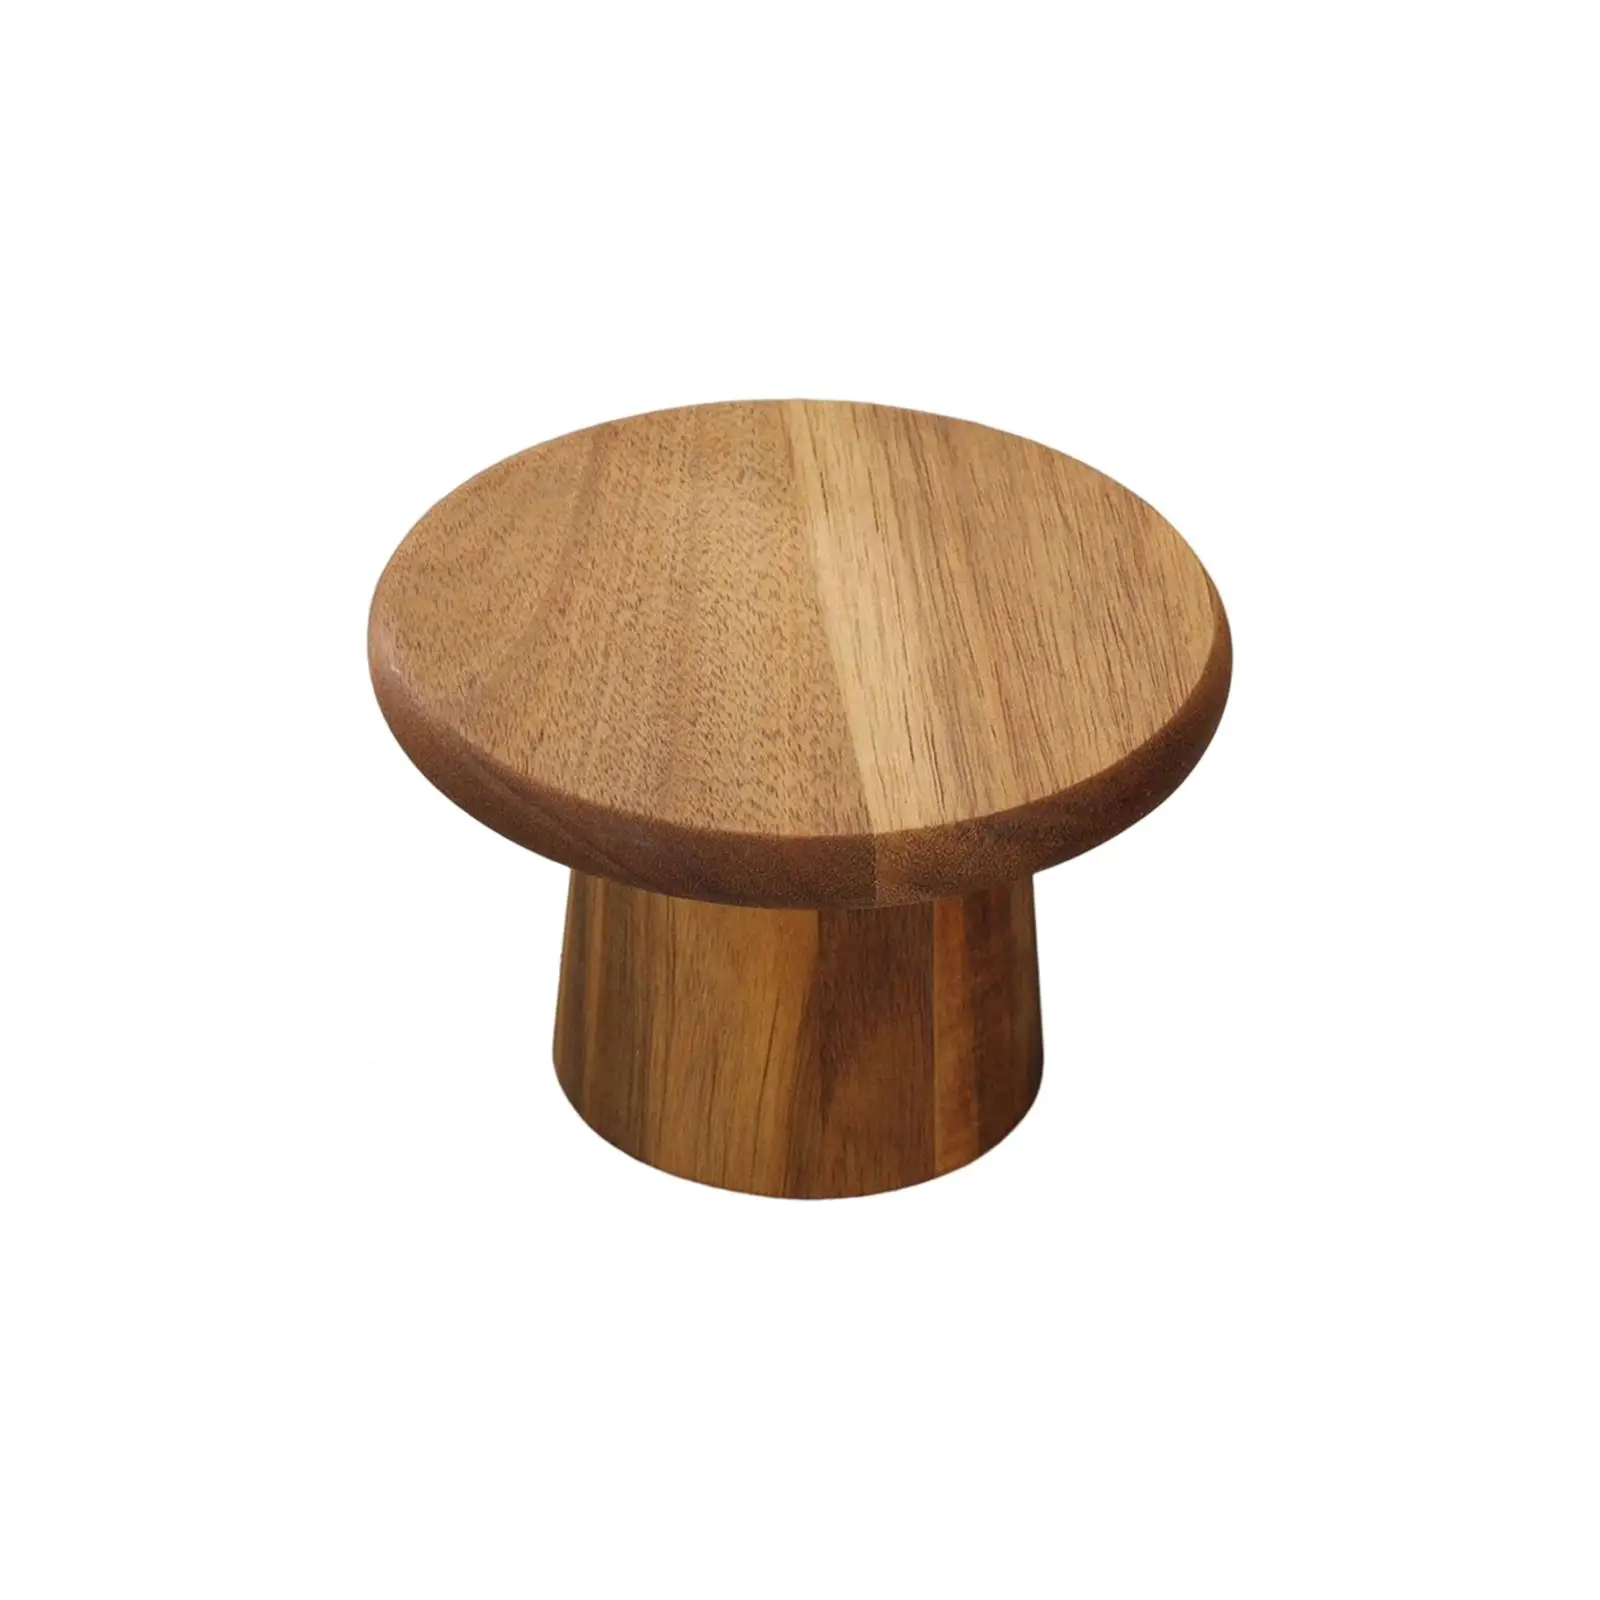 Wooden Cake Stand Multifunctional Farmhosue for Pastries Table Graduation